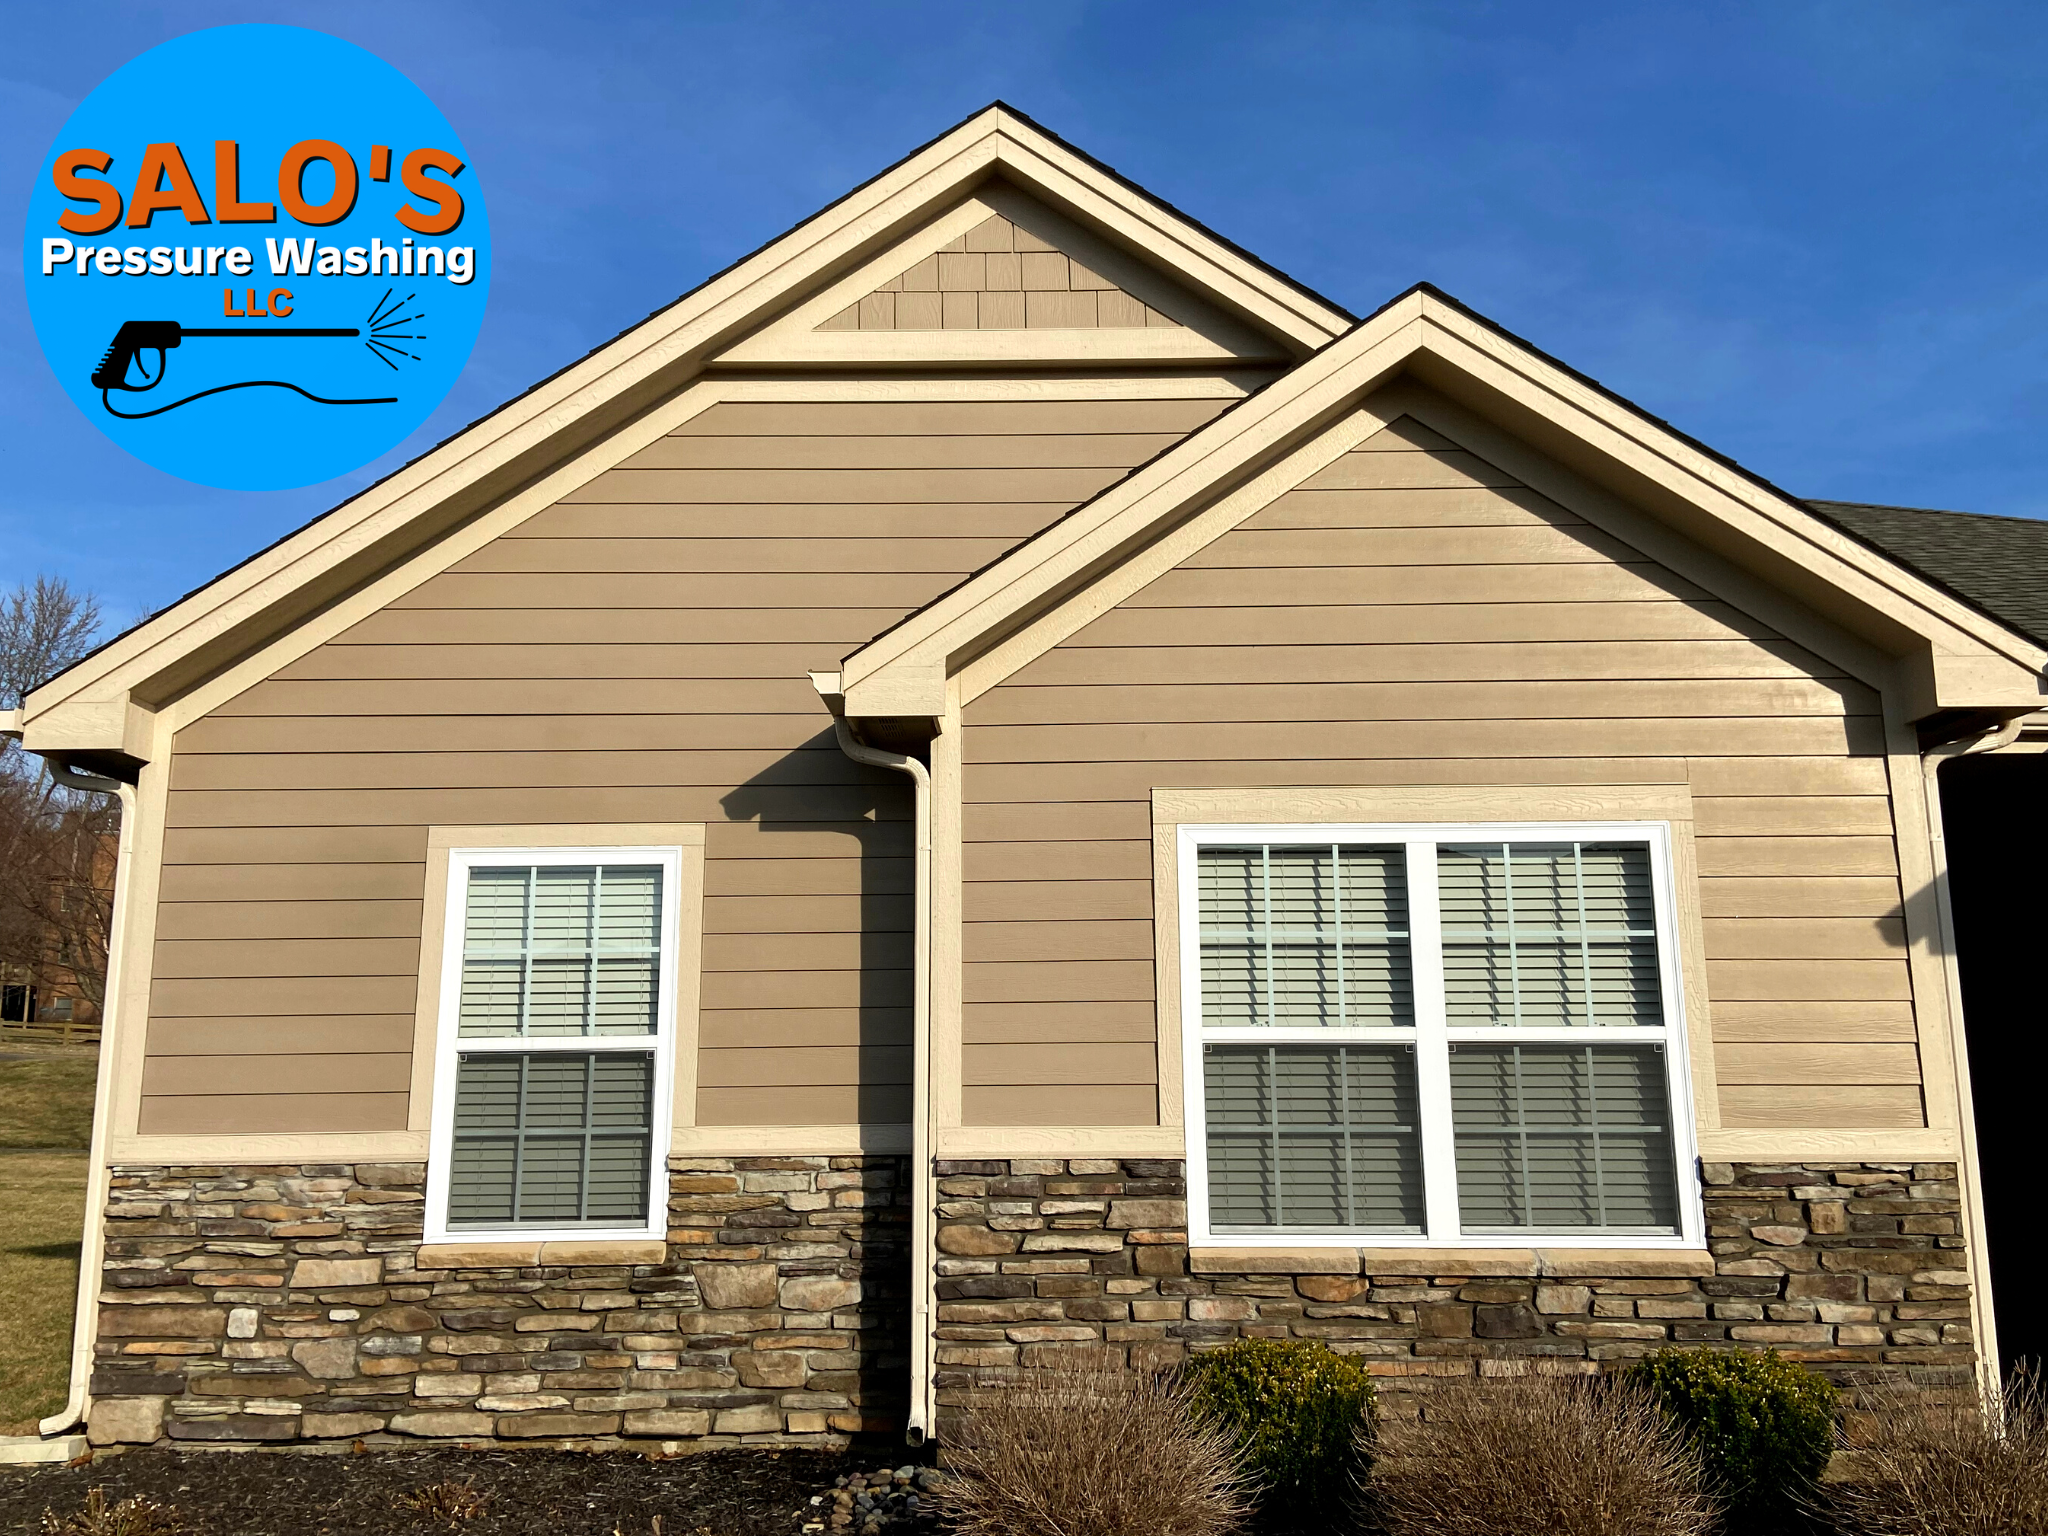 Top Quality Pressure Washing in Bellbrook, Ohio